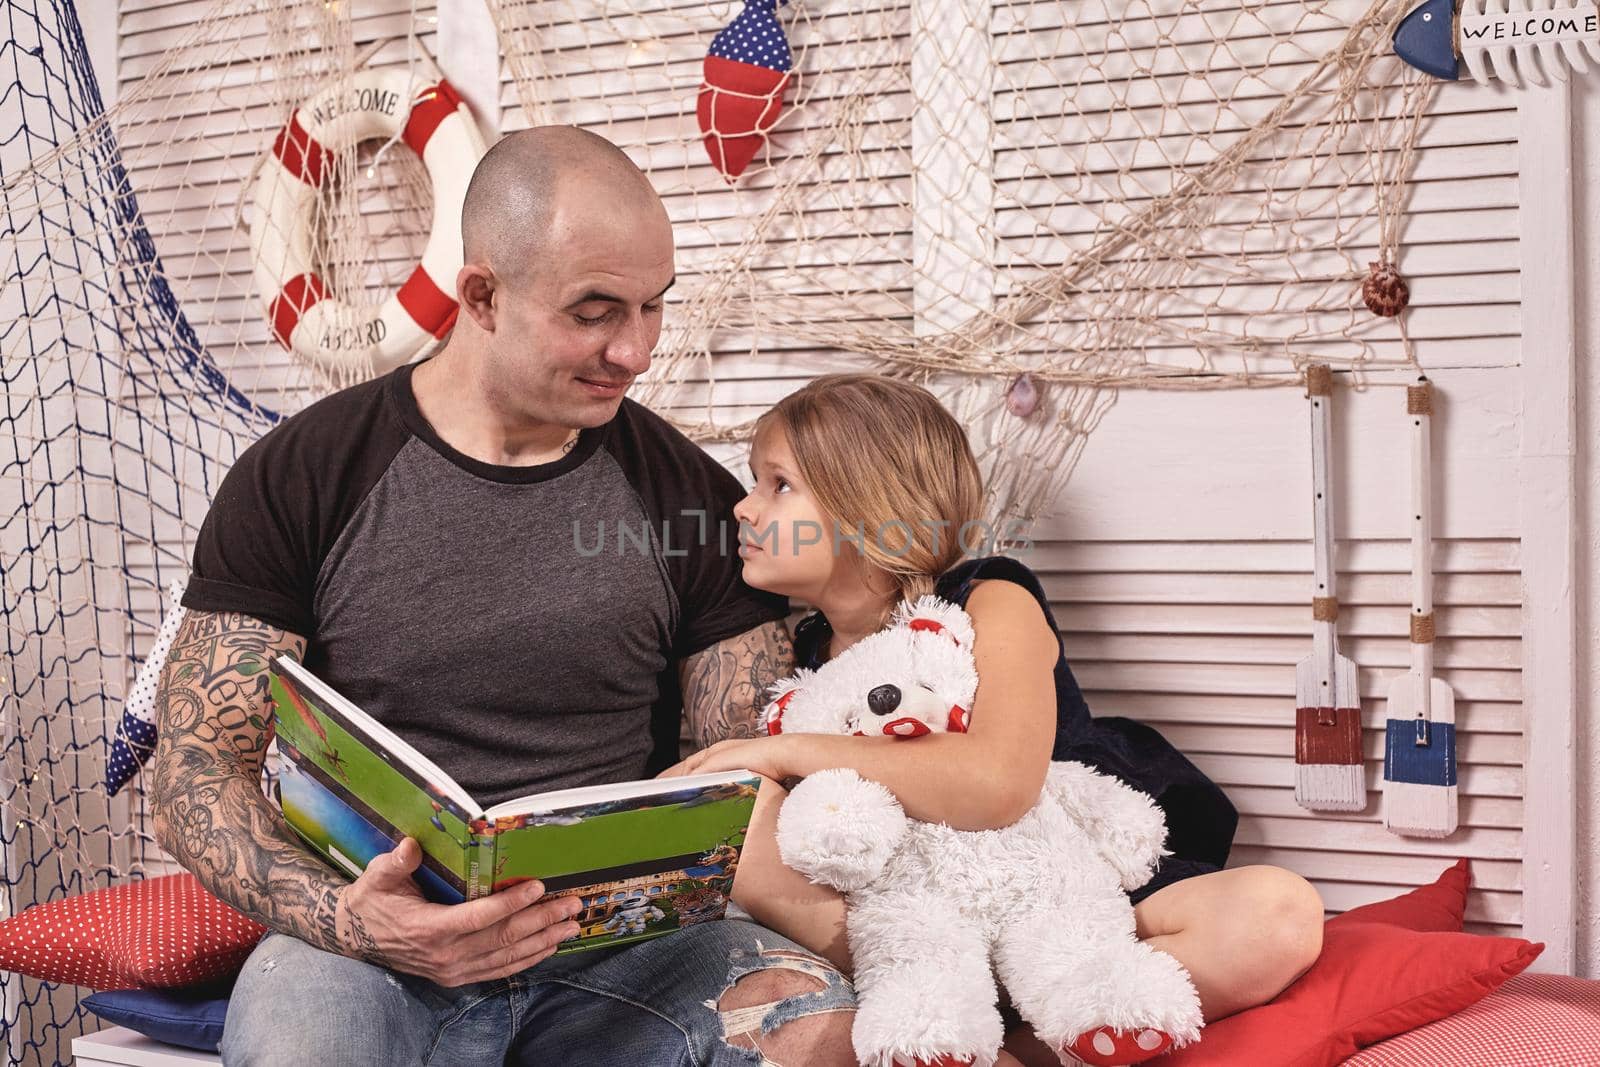 Bald tattoed man in a cap is spending time with his little cute daughter. They are sitting on a white bench with some red pillows, in a room decorated in a marine style. She is holding a toy bear and they are looking at each other. Reading fairytales while daughter is sitting nearby. Happy family.